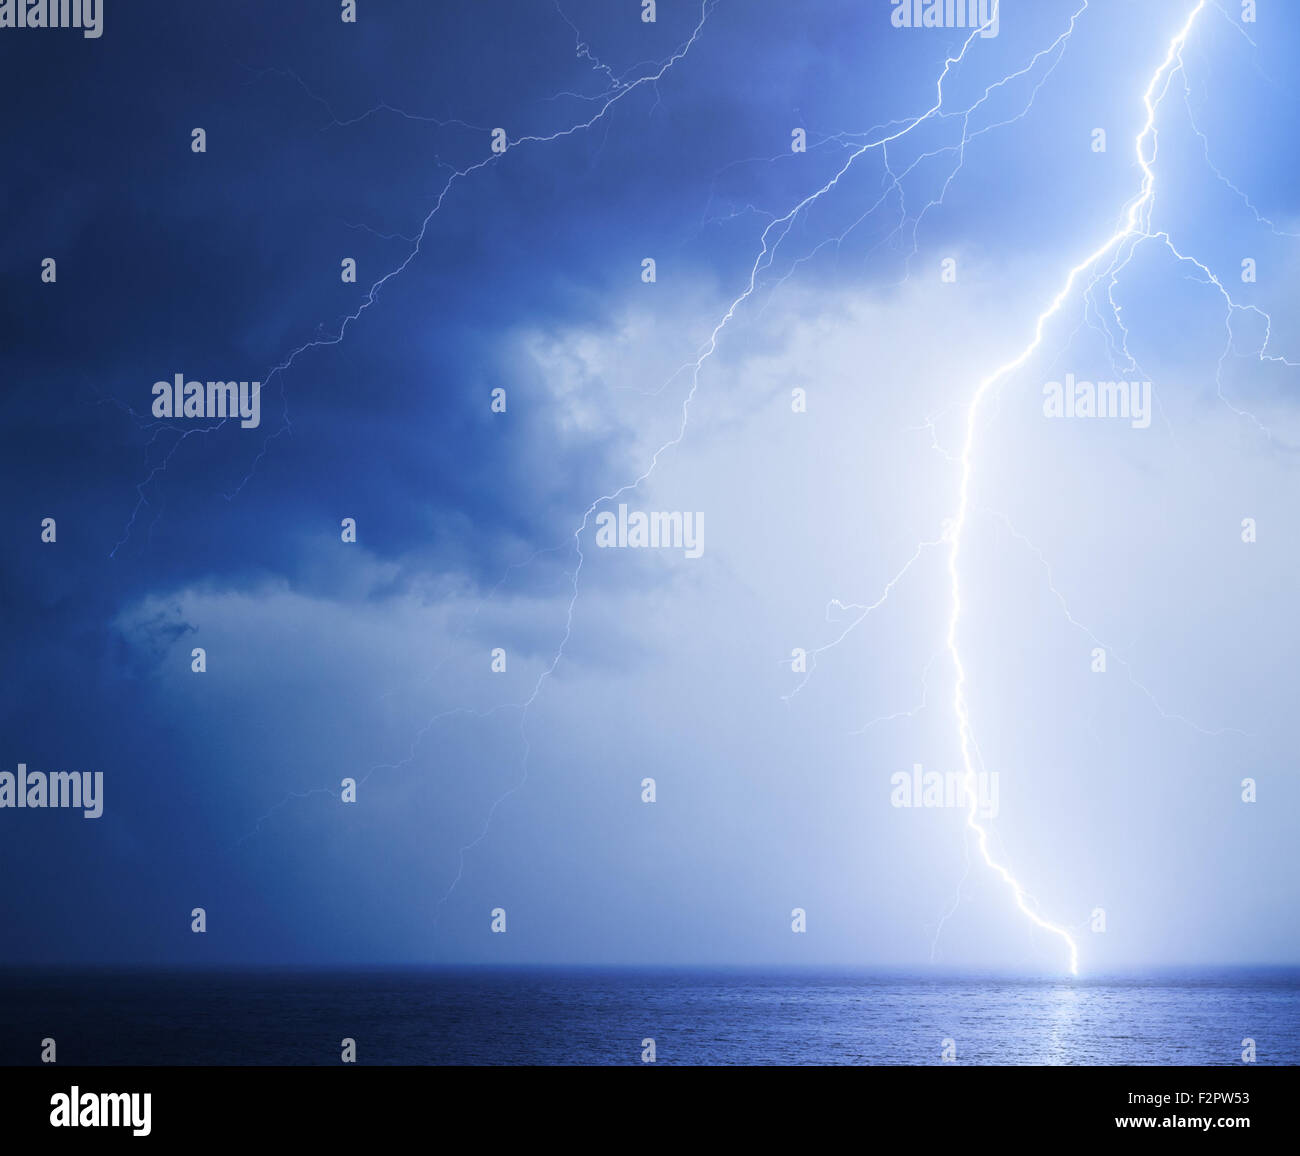 Seascape with bright lightning in dark blue sky Stock Photo